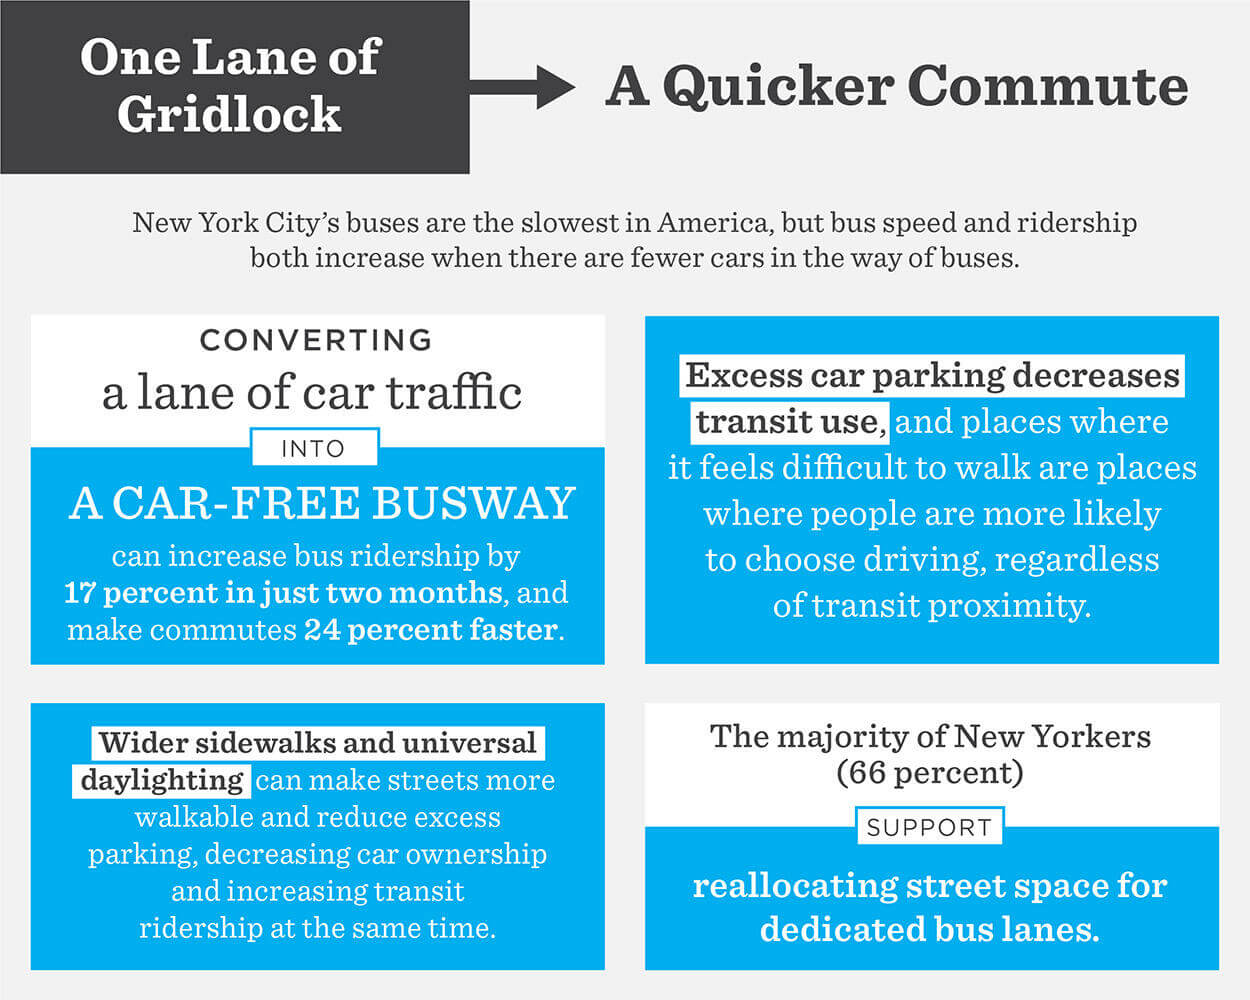 Graphic text highlighting how one lane of gridlock could be transformed into a quicker commute, and how the majority -- 66 percent -- of New Yorkers support reallocating street space for dedicated bus lanes.